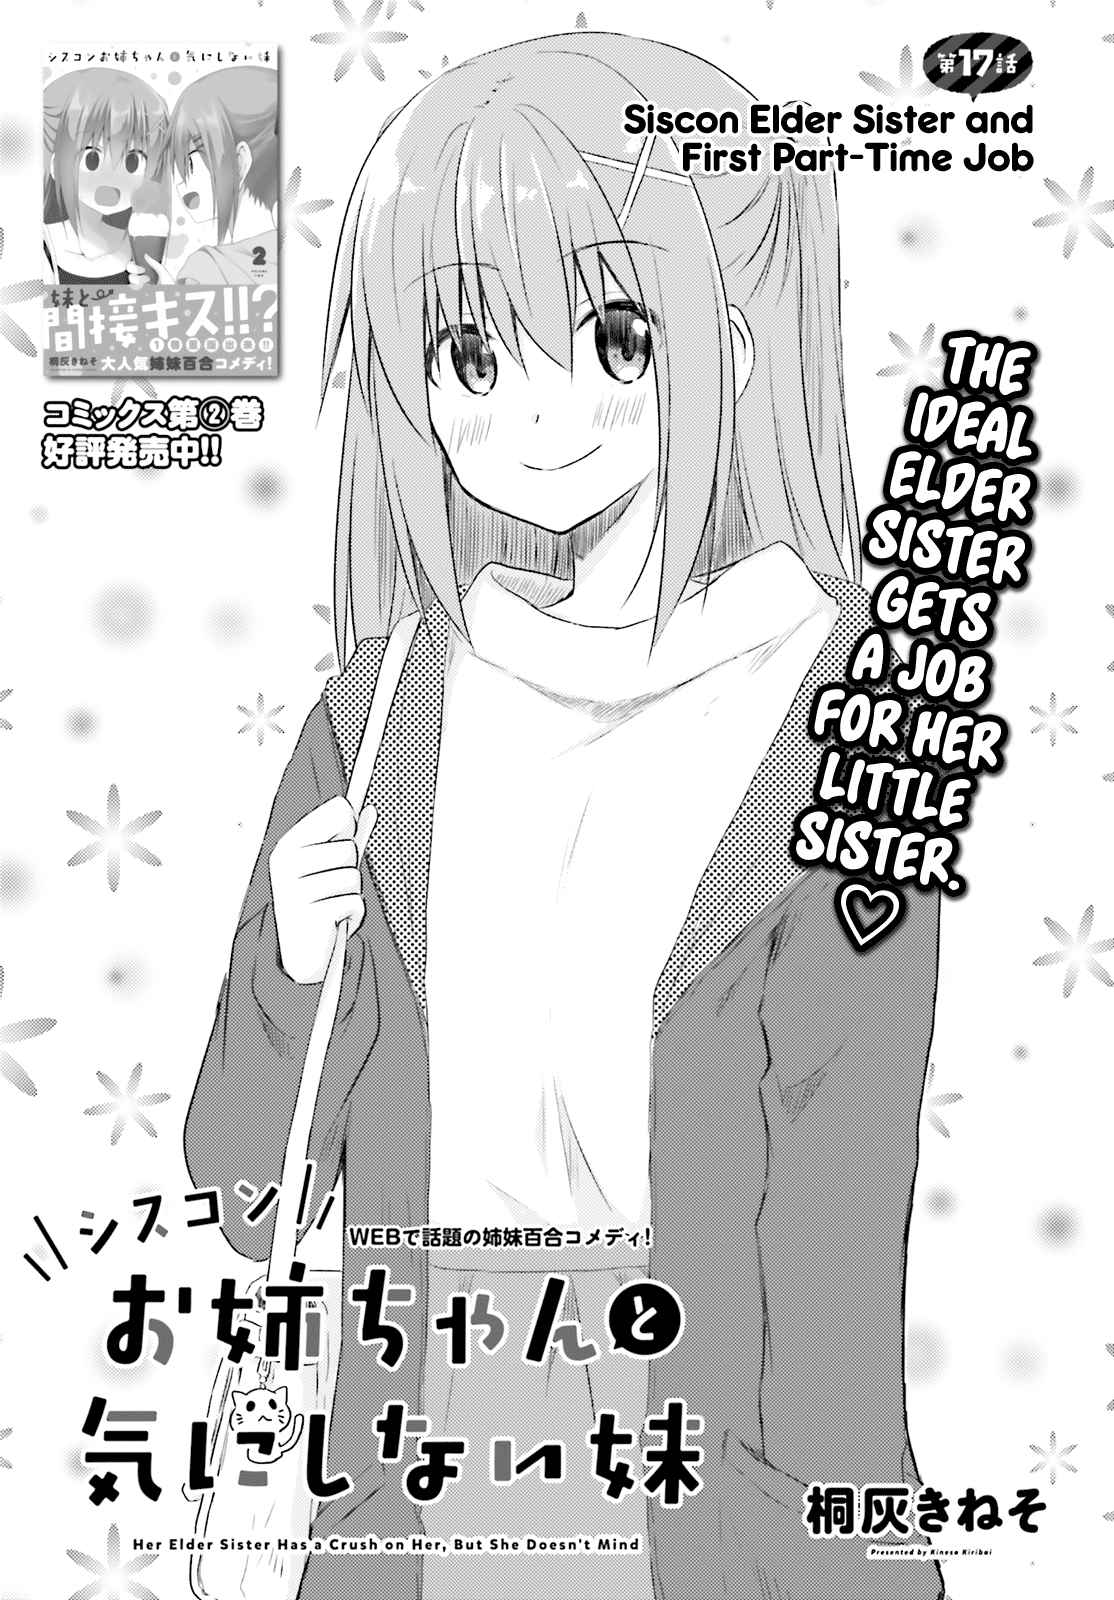 Her Elder Sister Has a Crush on Her, But She Doesn't Mind. Ch. 17 Siscon Elder Sister and First Part Time Job